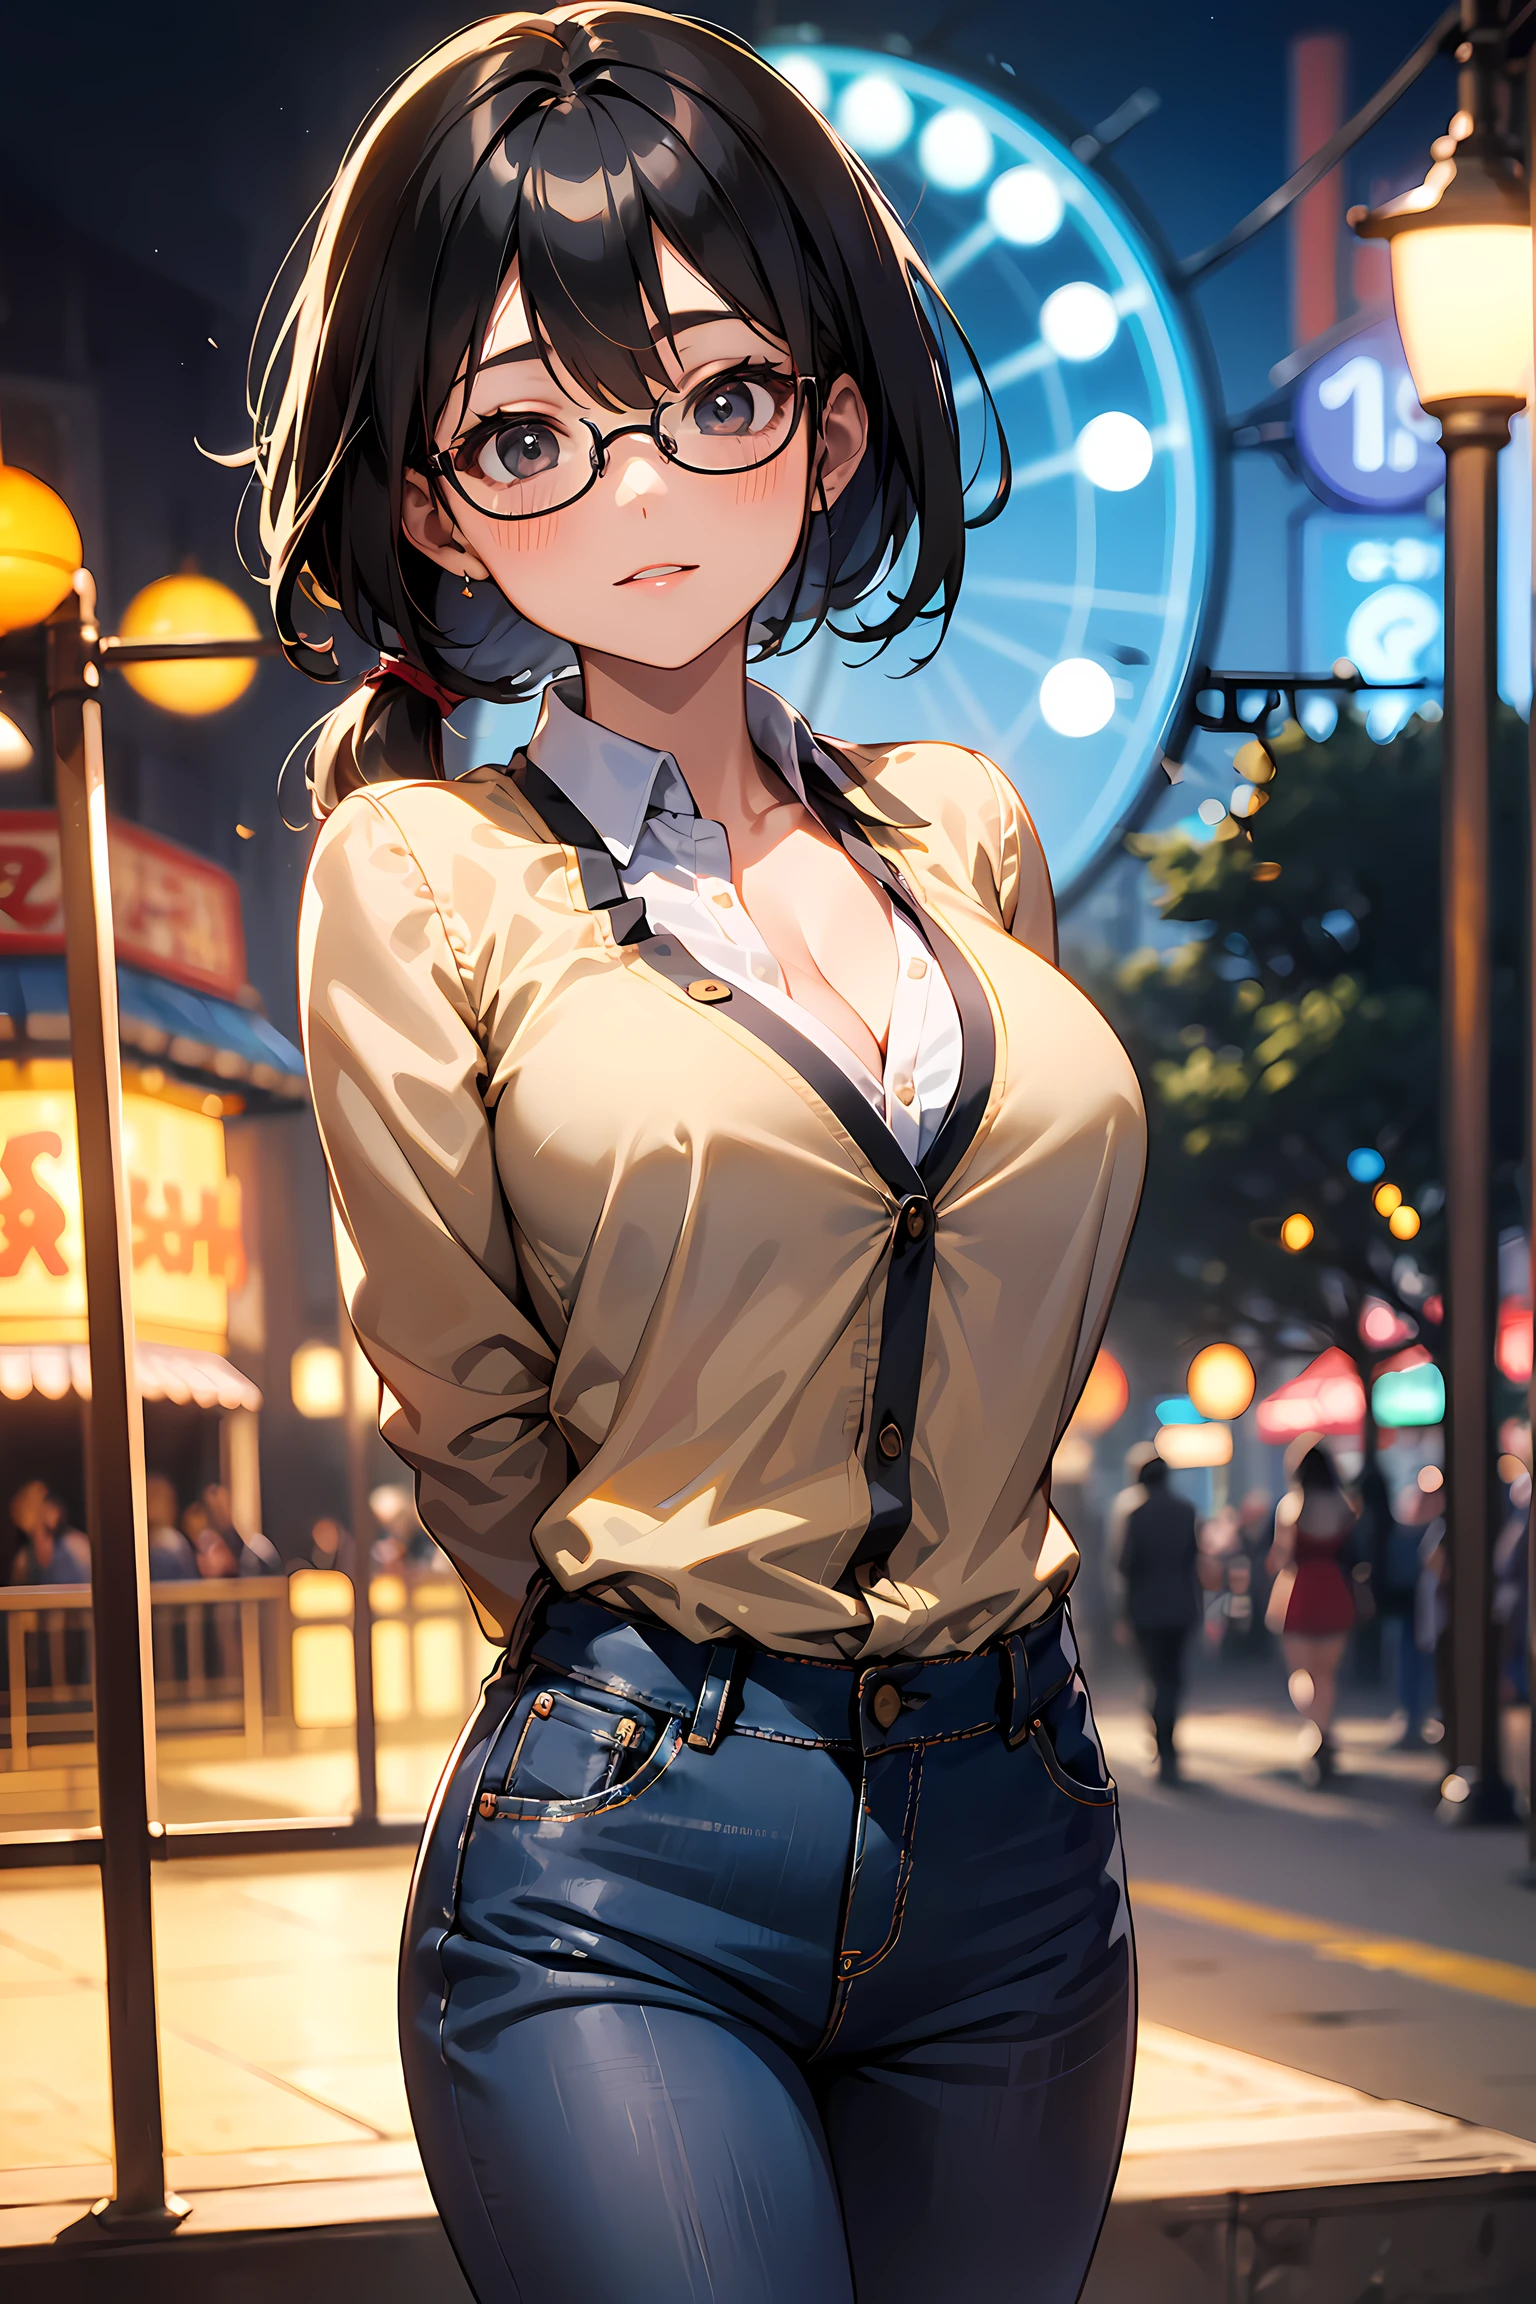 high resolution, Photo of a beautiful woman detailed_face, young handsome girl,realistic:0.5, perfect skin, (wearing a glasses:1.5), (ultra-detailed background, detailed background), bokeh, make happy expressions, happy emotion, gorgeous,pure, beautyfull detailed face and eyes,breasts, (black eyes:1.1), (a extremely pretty and beautiful Japanese woman), (sexy girl), (professional attire:1.3), (22 years old: 1.1), BREAK, (lovely outfit:1.2), (detailed blue collared shirt:1.2), (skinny denim pants:1.2), (leather boots))), cleavage, beautiful detailed skin, (cute:1.2), (black hair), ((jpop idol)), (upper thigh:0.6), (depth of field),soft light, Lens Glow looking at viewer, (Drooping eyes:1.2), straight teeth,smile, floating hair, (black hair:1.2), brown eyes BREAK movie scene, cinematic, full colors, 4k, 8k, 16k, RAW photo, masterpiece, professionally color graded, professional photography, high school girl, hair up, , soft clean focus, realistic lighting and shading, (an extremely delicate and beautiful art)1.3, elegant,active angle,dynamism pose BREAK (ponytail:1.3), (shiny-black thin hair:1.2), bangs, dark brown eyes, beautiful eyes, princess eyes, (big eyes:1.3), bangs, wearing a glasses:1.3, Hair between eyes, short hair:1.3, (slender:1.1), (medium-breasts:0.95), (thin waist: 1.15), (detailed beautiful girl: 1.4), Parted lips, Red lips, full-make-up face, (shiny skin), ((Perfect Female Body)), (upper body image:1.3), Perfect Anatomy, Perfect Proportions, (most beautiful Korean actress face:1.3, extremely cute and beautiful Japanese actress face:1.3), ,(1glasses girl:1.3, solo), ,(blush:1.1), gray background, solo focus, (bust shot:1.2), cinematic light, (nostalgic night scene:1.4), (amusement park:1.4), (merry-go-round、the Ferris wheel、rollercoaster), (arms behind back :1.4), (looking at viewer:1.2